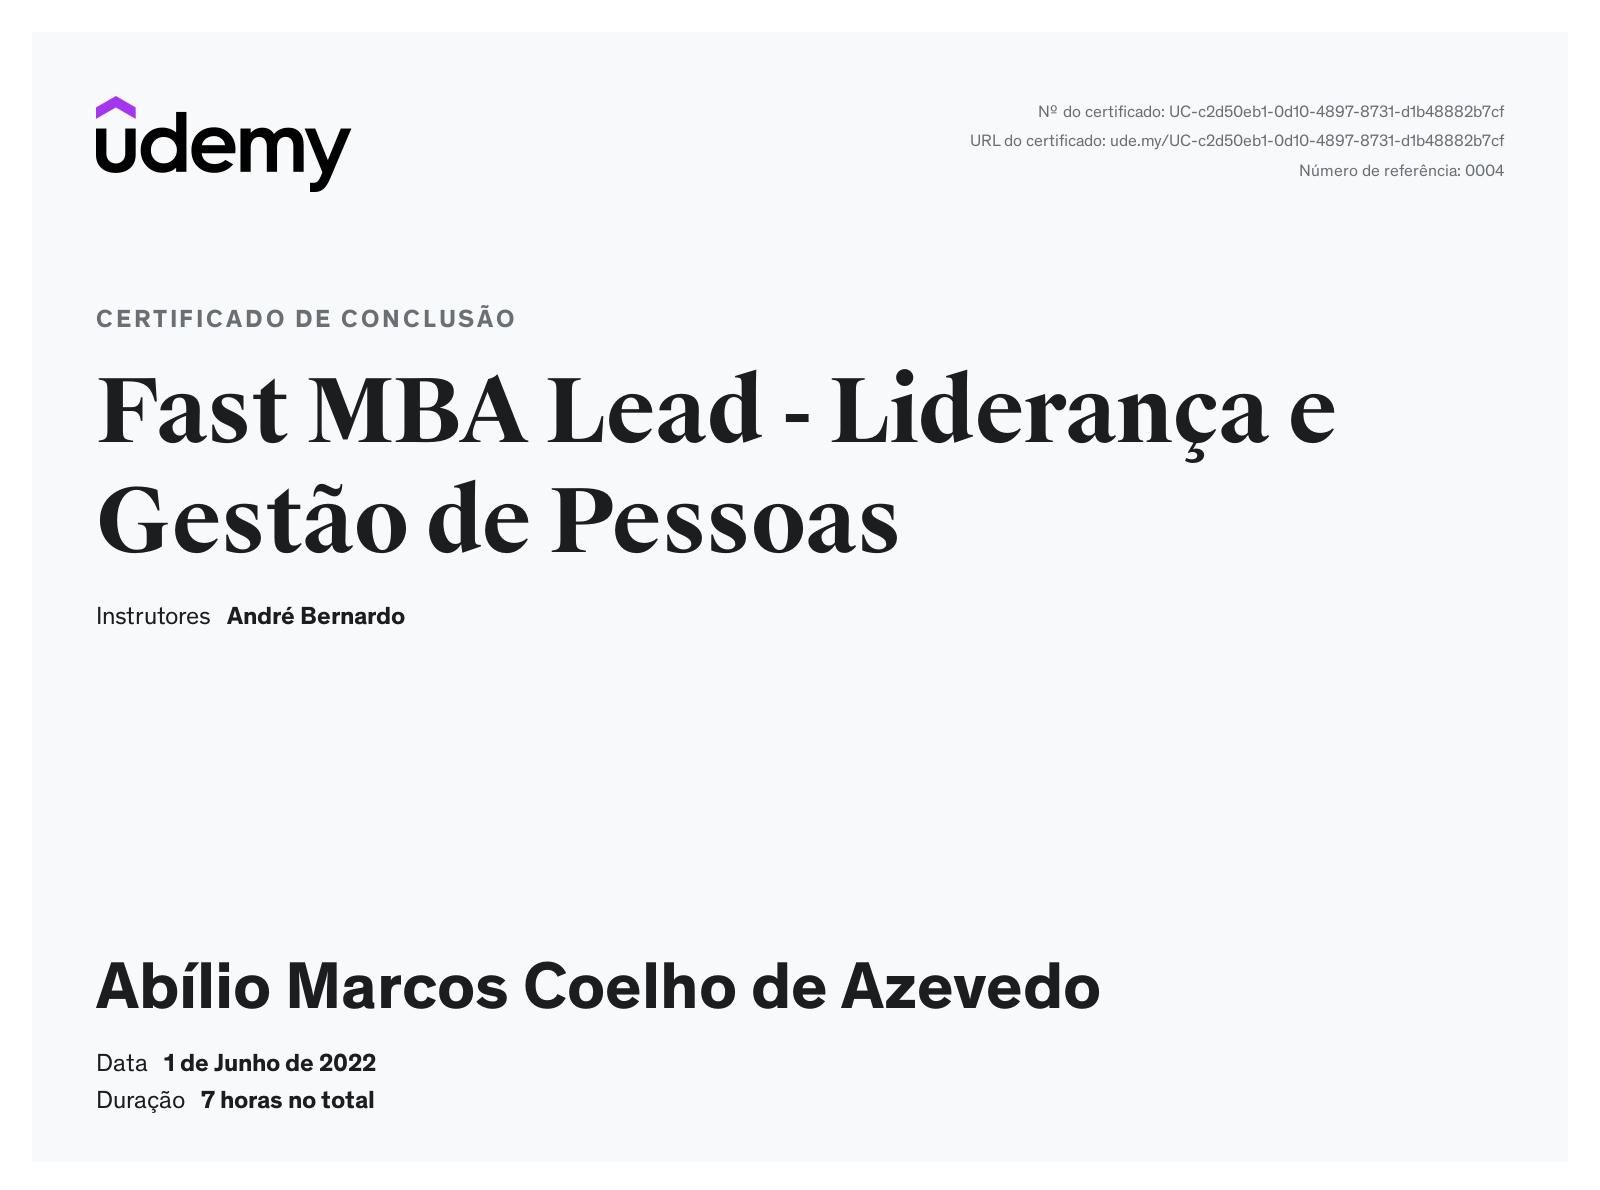 Cover Image for Fast MBA Lead - Leadership and People Management